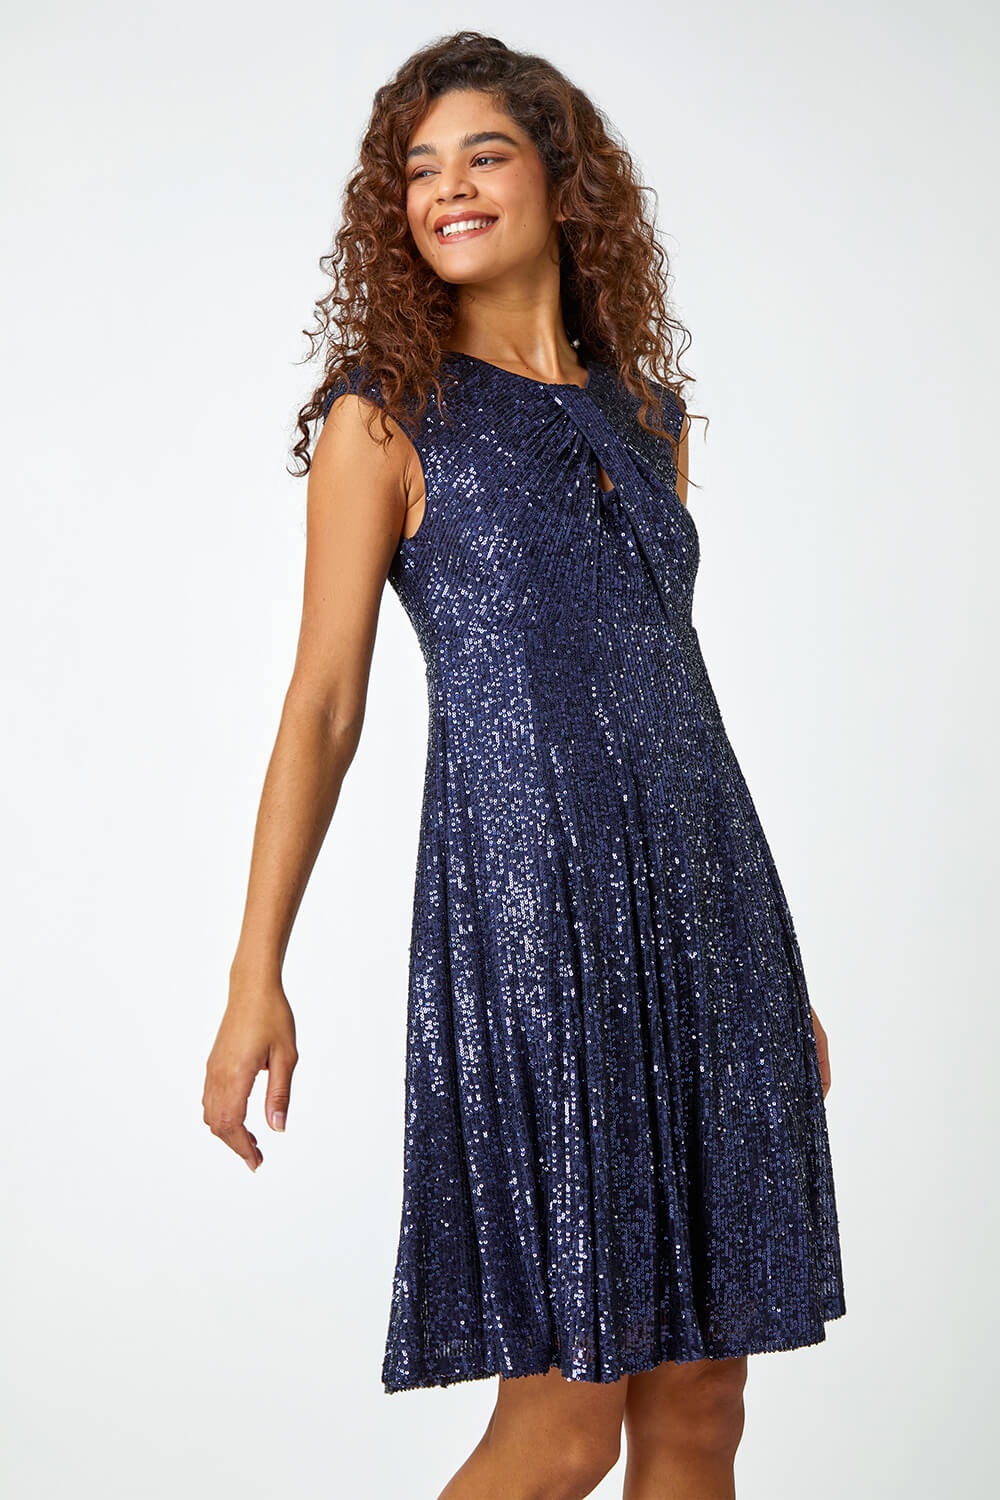 Midnight Blue Sequin Twist Front Stretch Dress, Image 2 of 5